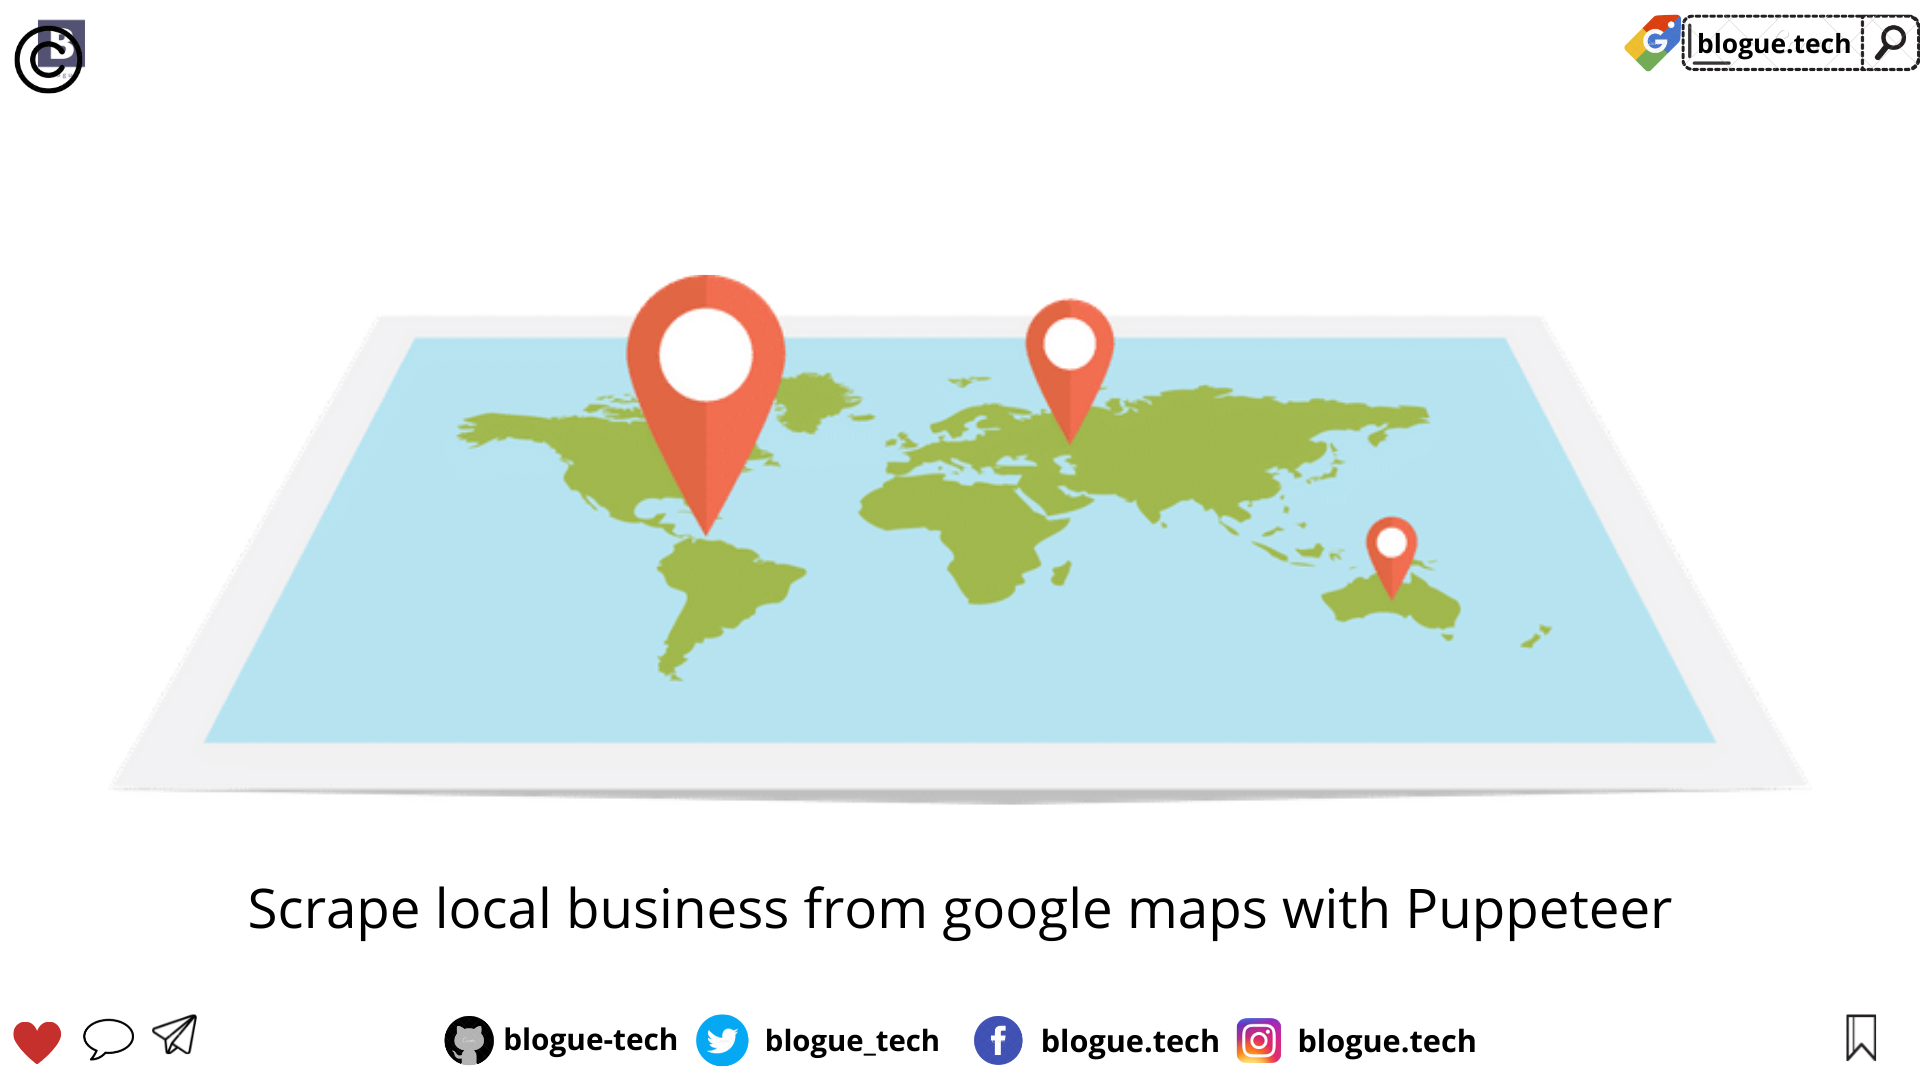 Scrape local business from google maps with Puppeteer